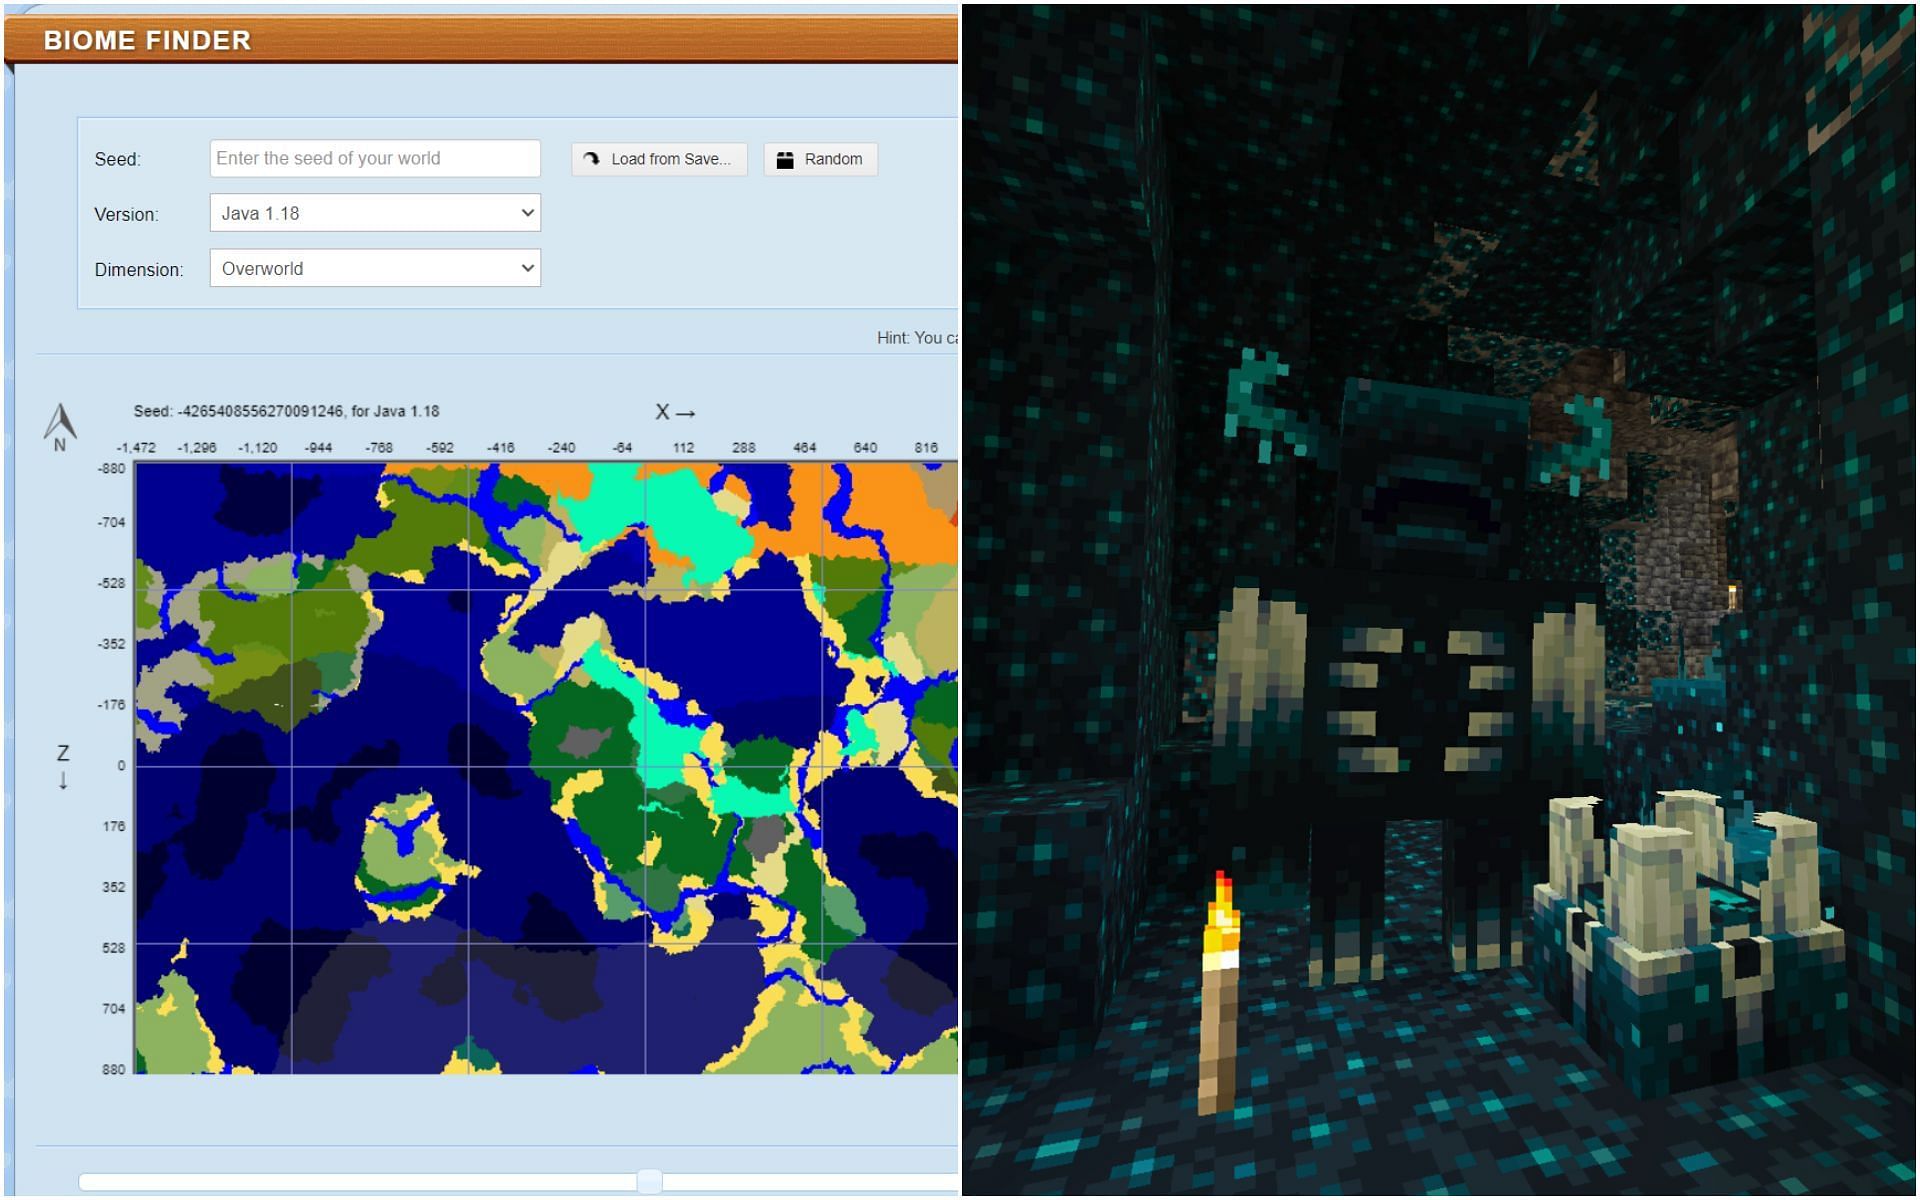 Players can easily find rare biomes with biome finder for Minecraft 1.19 (Image via Sportskeeda)